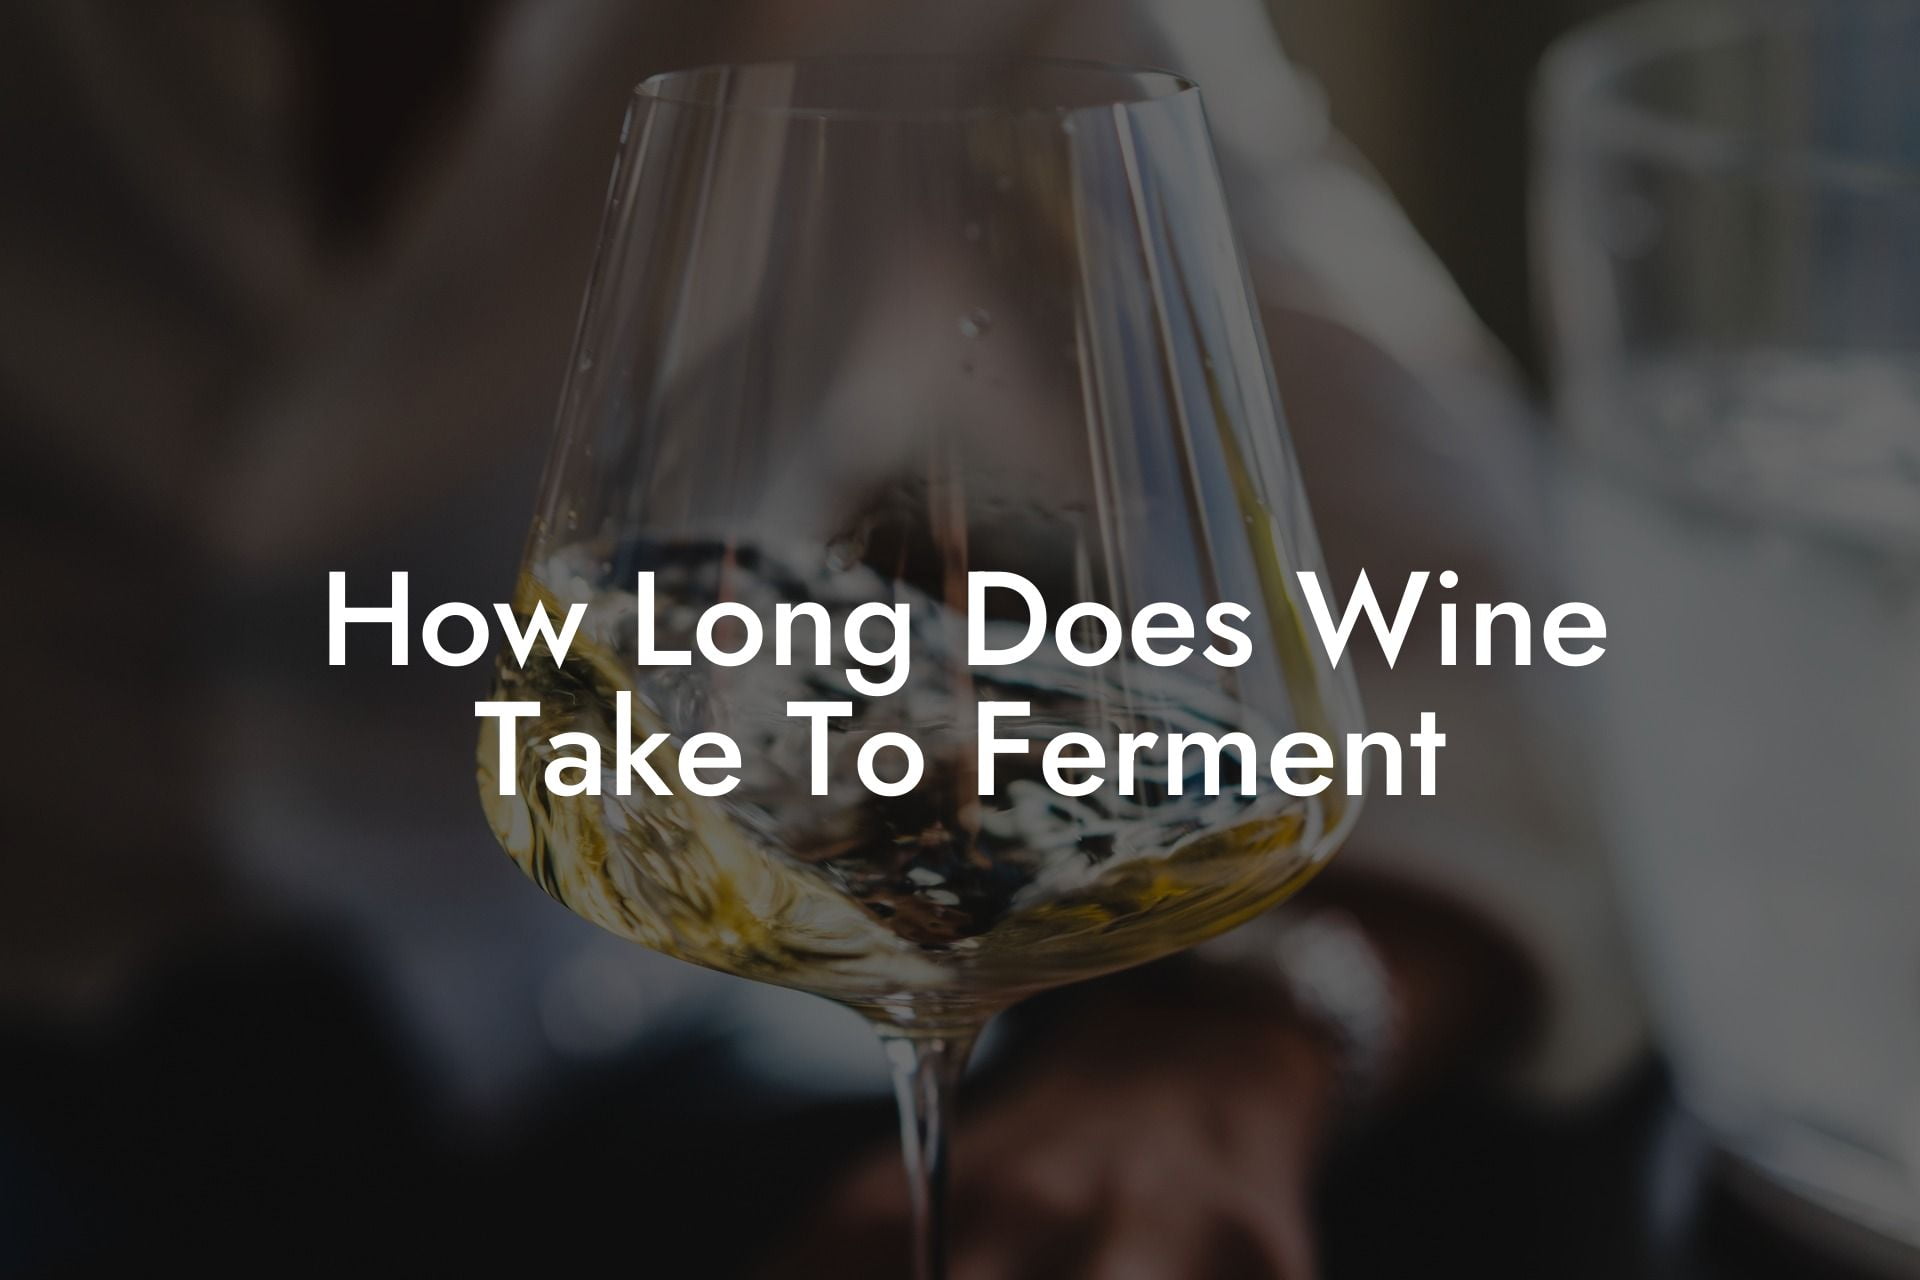 How Long Does Wine Take To Ferment